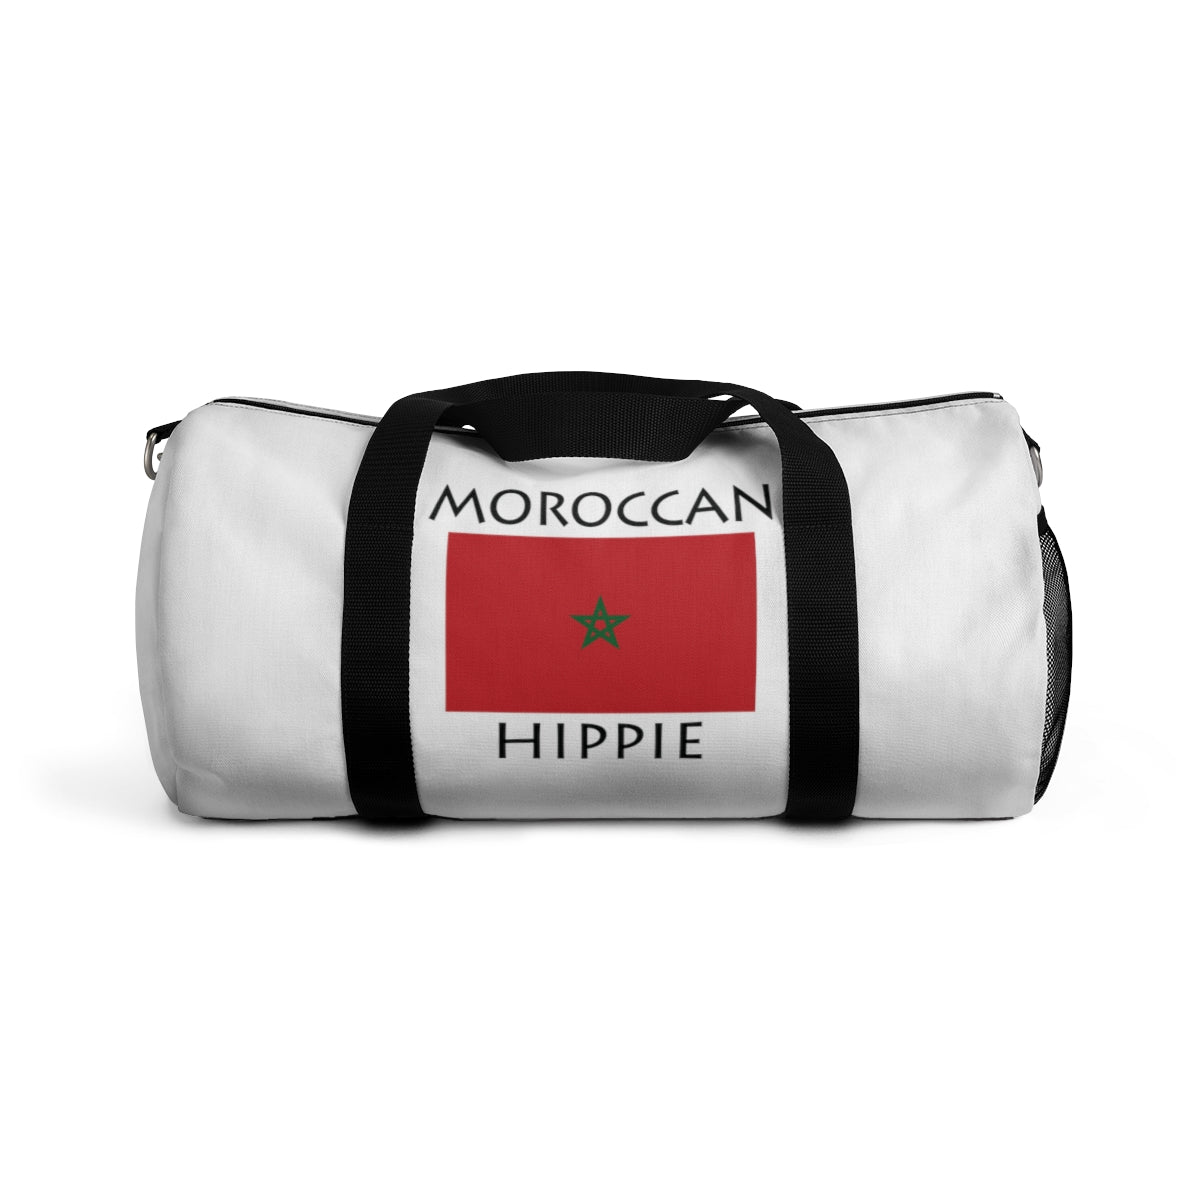  Stately Wear's Moroccan Flag Hippie duffel bag is colorful, iconic and stylish. We are a Katie Couric Shop partner. This duffel bag is the perfect accessory as a beach bag, ski bag, travel bag, shopping bag & gym bag, Pilates bag or yoga bag. Custom made one-at-a-time with environmentally friendly biodegradable inks & dyes. 2 sizes to choose. Stately Wear's bags are very durable, soft and colorful duffels with durable straps.